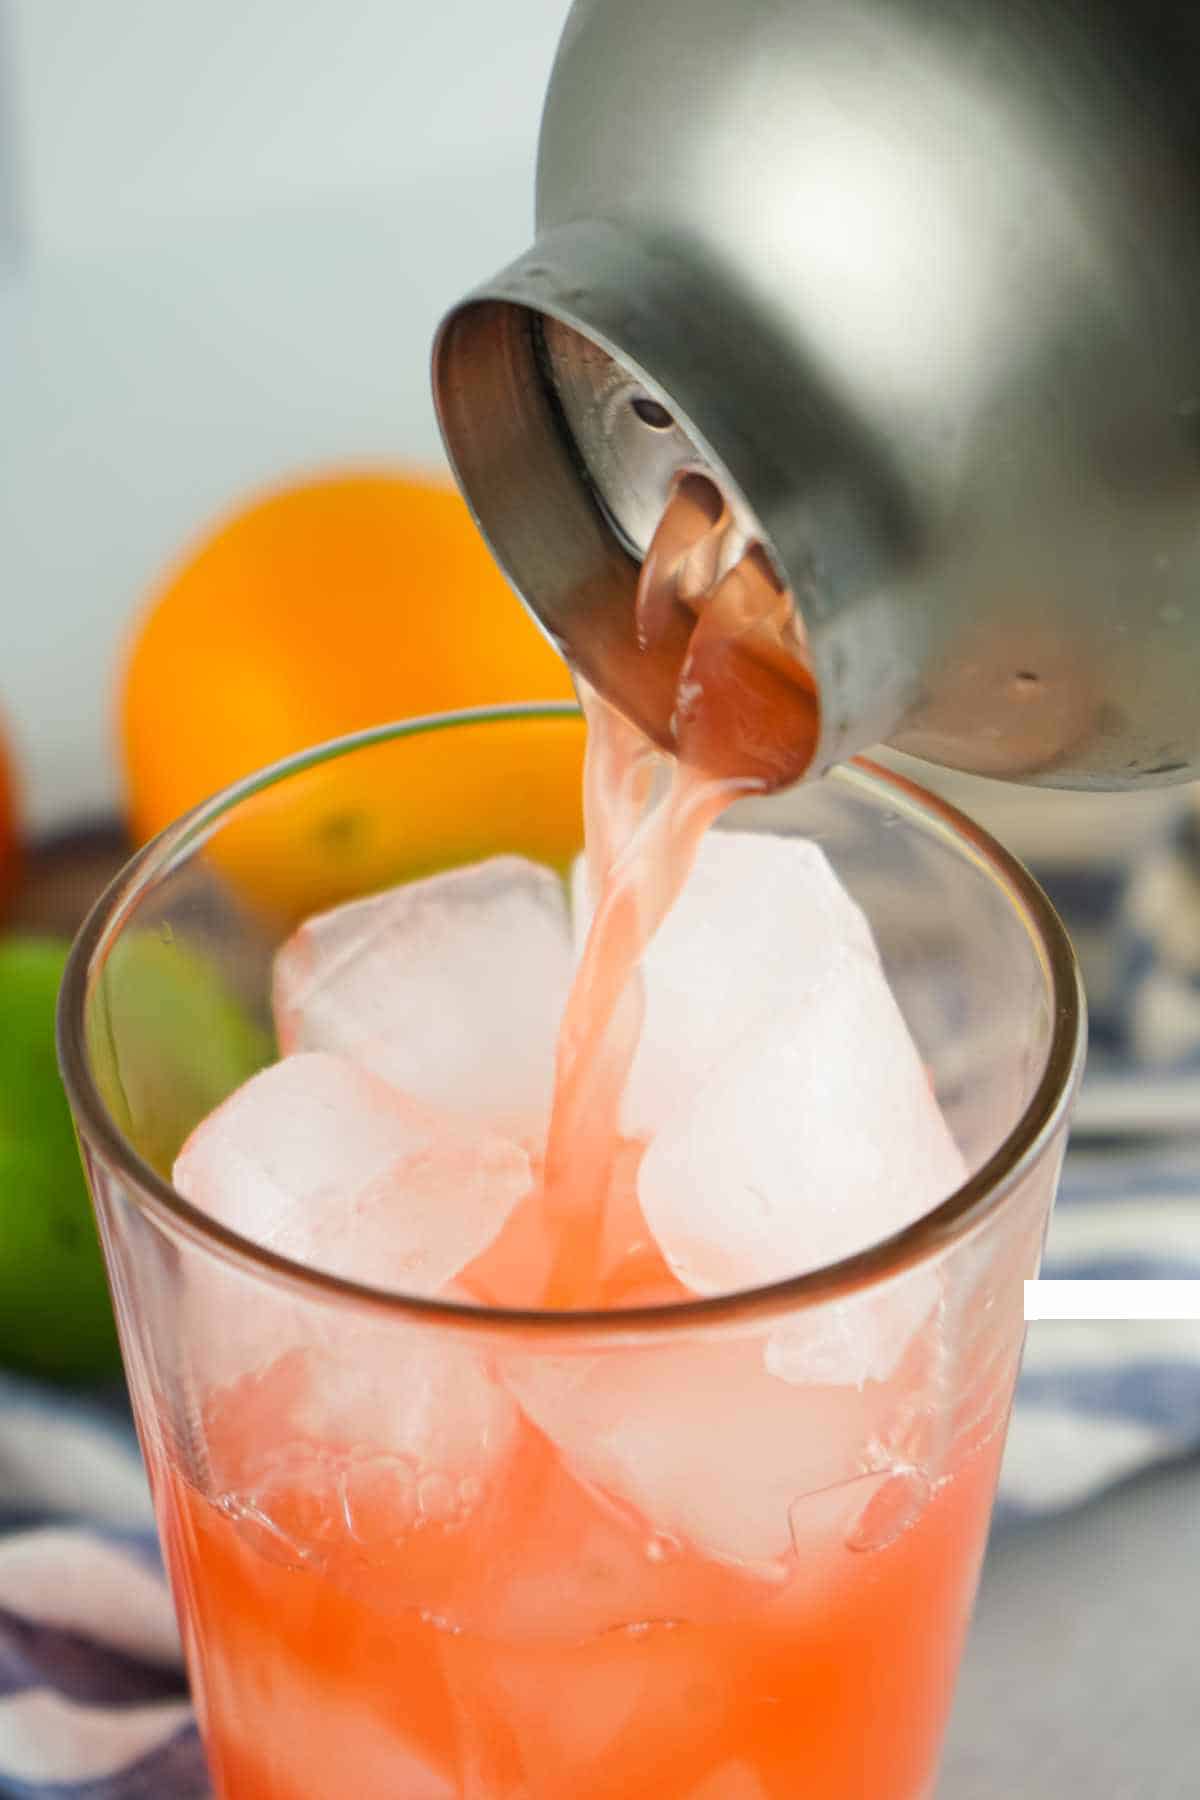 shaker pouring mixed drink into ice filled tumbler.